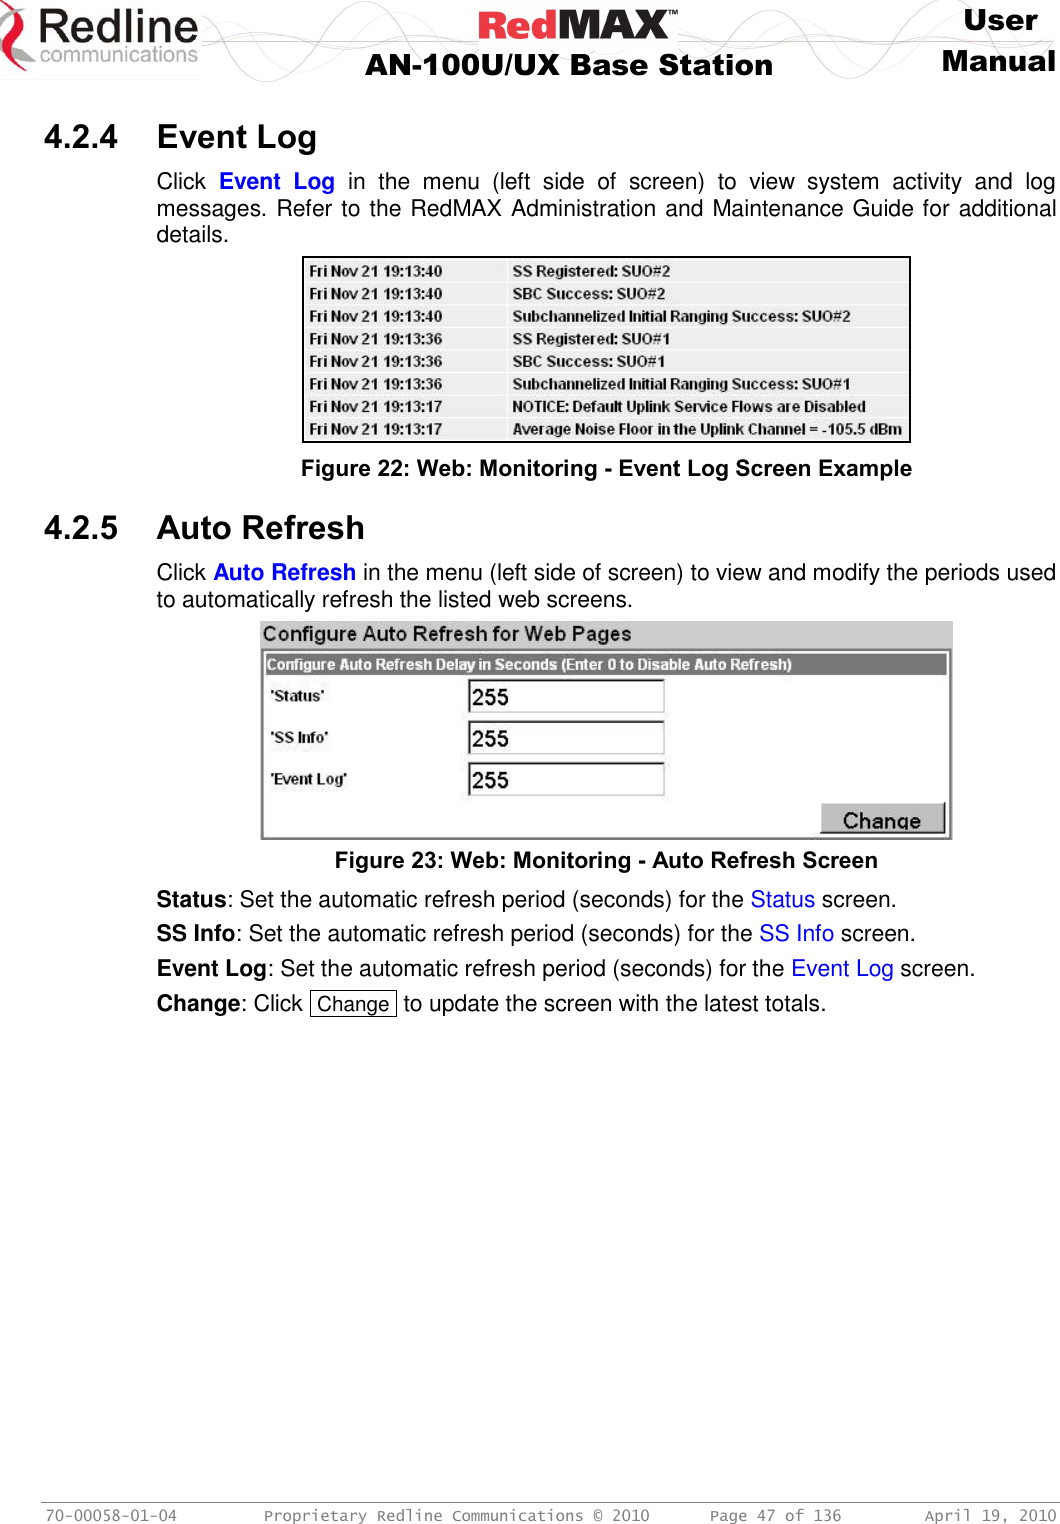     User  AN-100U/UX Base Station Manual   70-00058-01-04  Proprietary Redline Communications © 2010   Page 47 of 136  April 19, 2010  4.2.4 Event Log Click  Event  Log  in  the  menu  (left  side  of  screen)  to  view  system  activity  and  log messages. Refer to the RedMAX Administration and Maintenance Guide for additional details.  Figure 22: Web: Monitoring - Event Log Screen Example  4.2.5 Auto Refresh Click Auto Refresh in the menu (left side of screen) to view and modify the periods used to automatically refresh the listed web screens.  Figure 23: Web: Monitoring - Auto Refresh Screen Status: Set the automatic refresh period (seconds) for the Status screen. SS Info: Set the automatic refresh period (seconds) for the SS Info screen. Event Log: Set the automatic refresh period (seconds) for the Event Log screen. Change: Click  Change  to update the screen with the latest totals. 